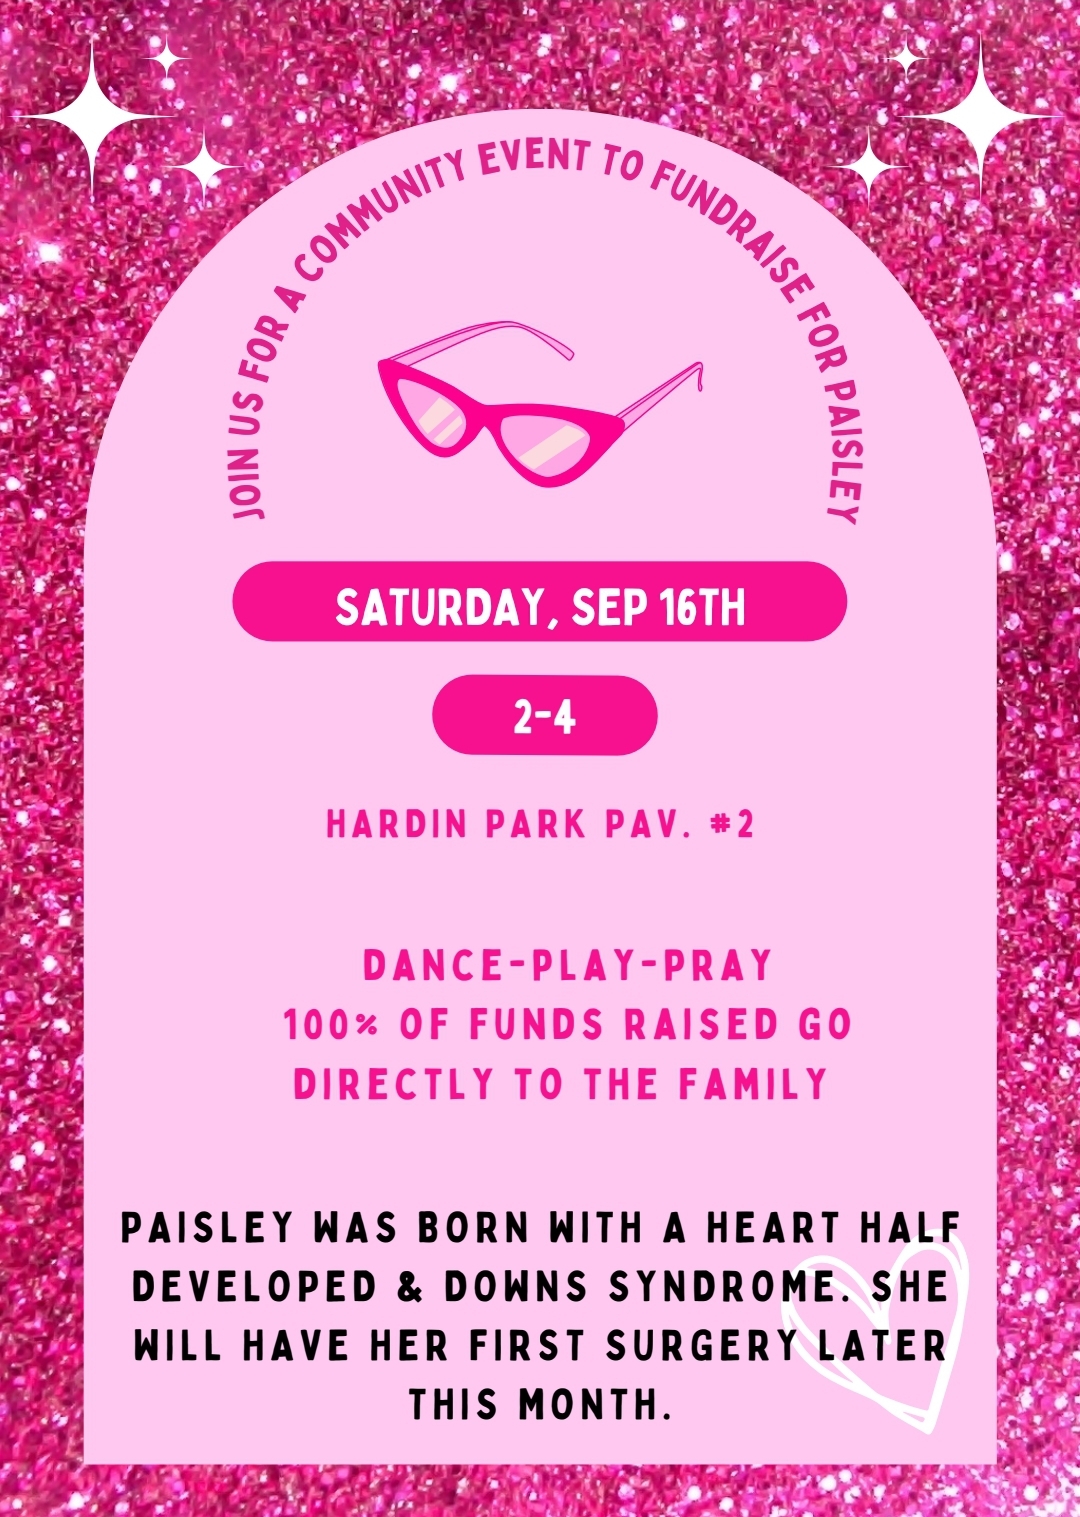 Dance-Play-Pray Benefit for Paisley